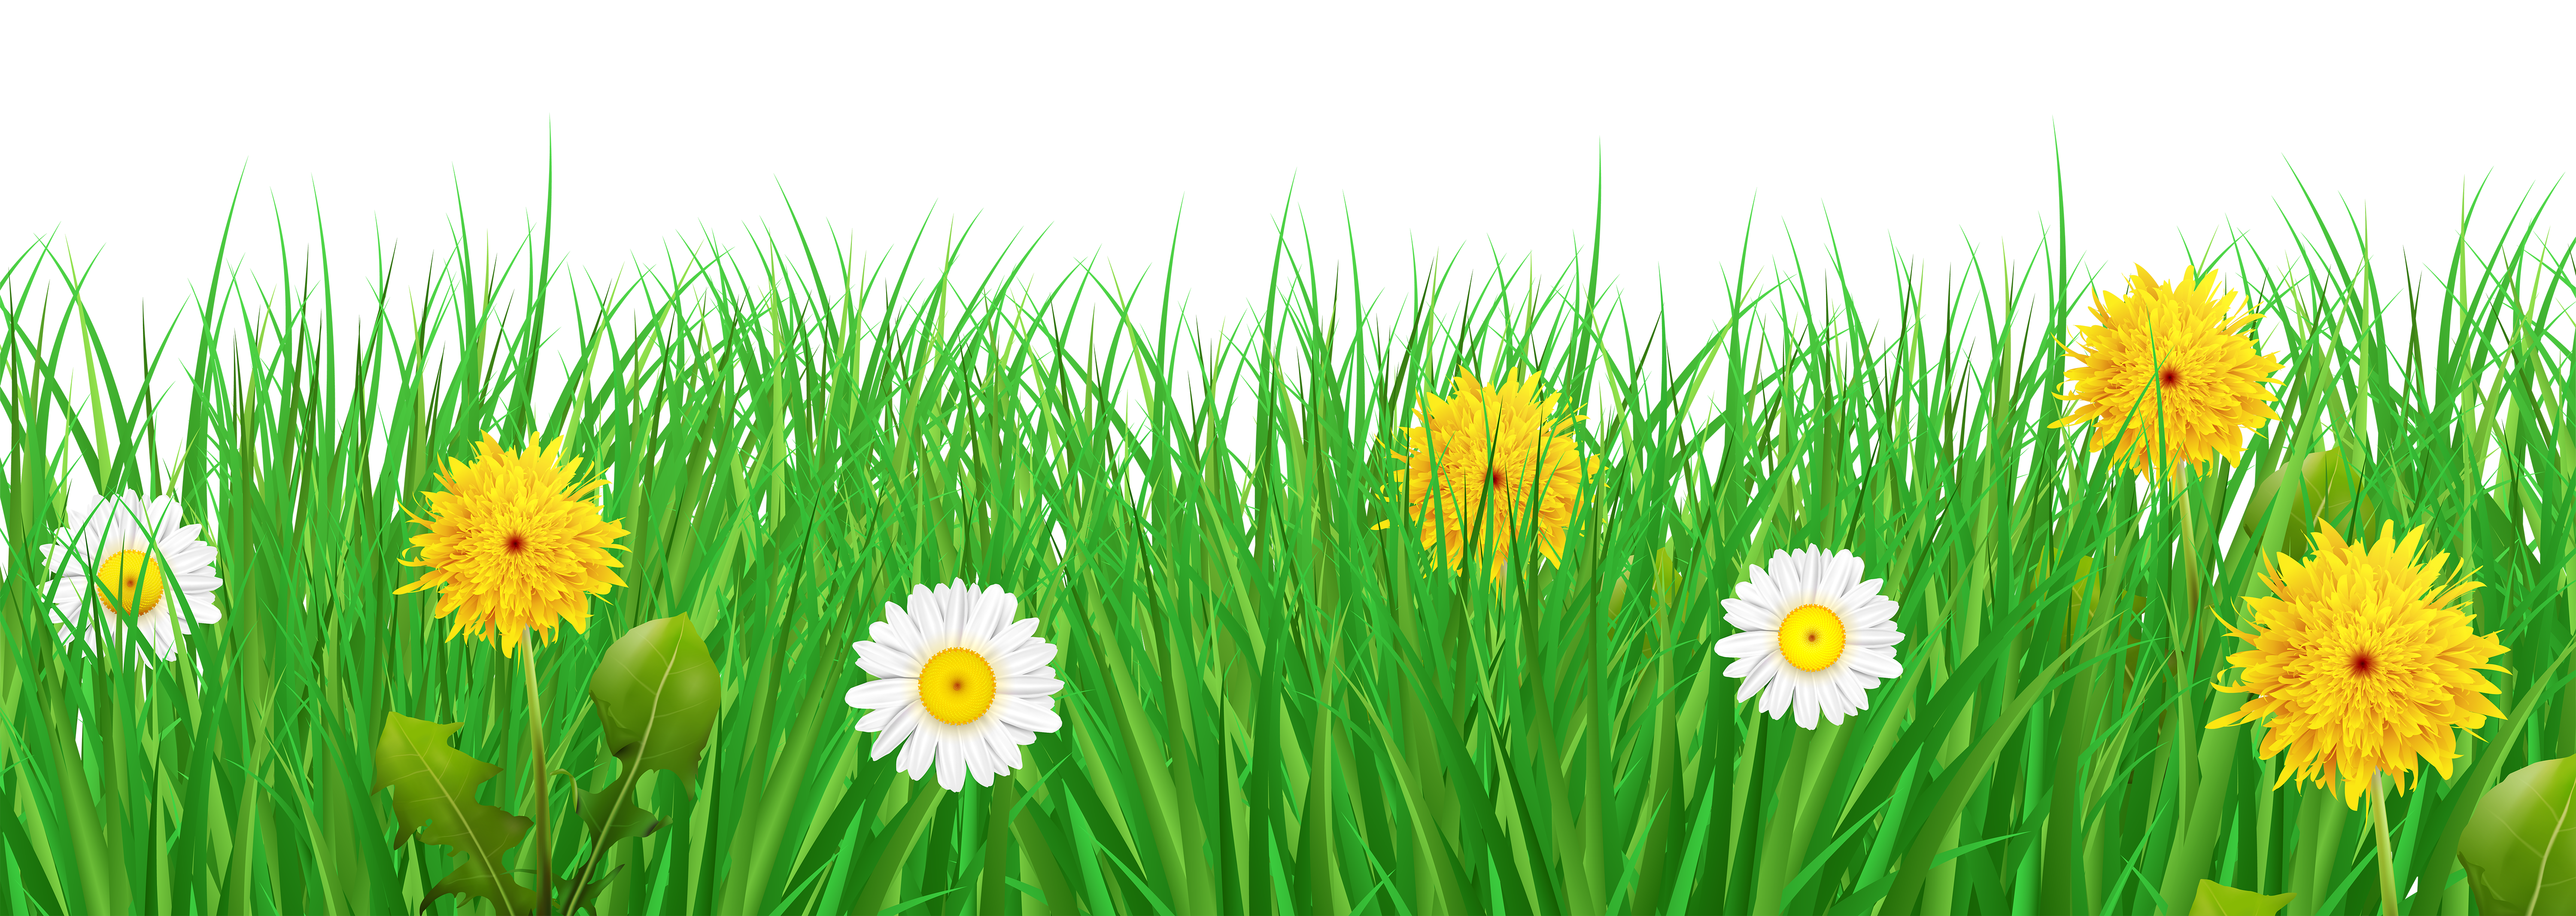 free clipart grass and flowers - photo #29